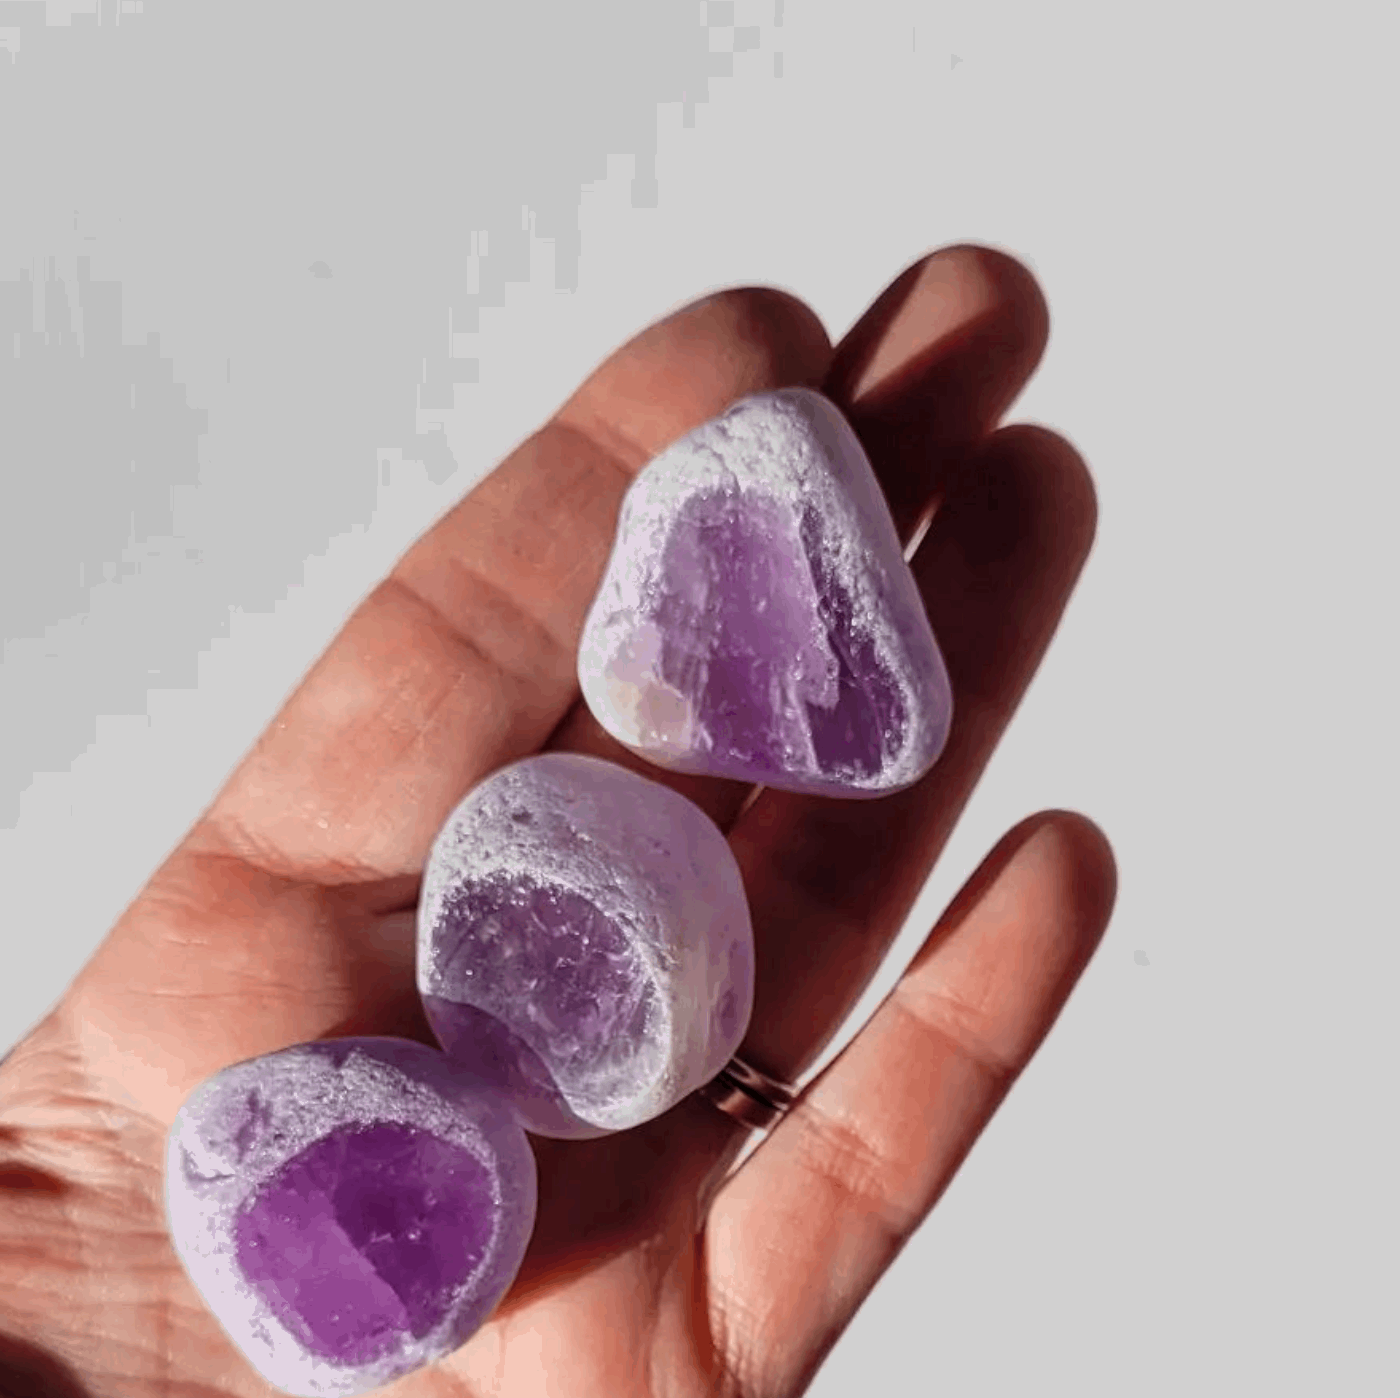 Amethyst witches seer stone / crystal ema egg